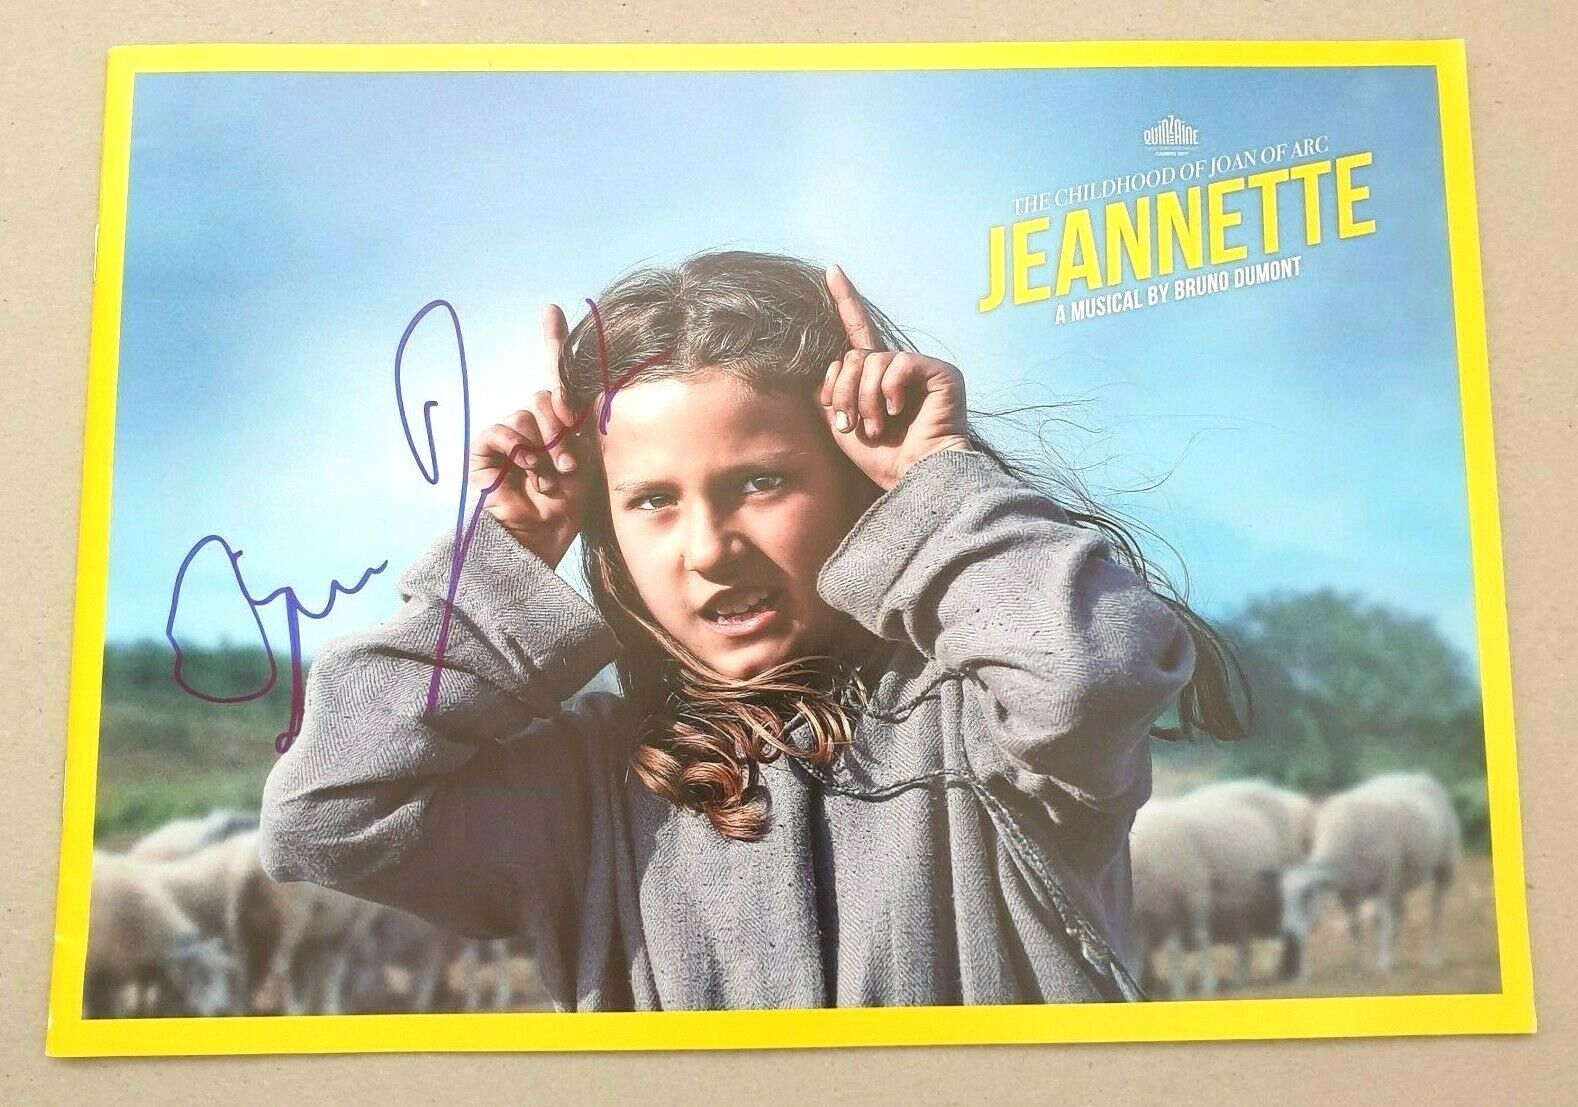 Bruno Dumont JEANNETTE THE CHILDHOOD OF JOAN OF ARC Signed Autographed Presskit